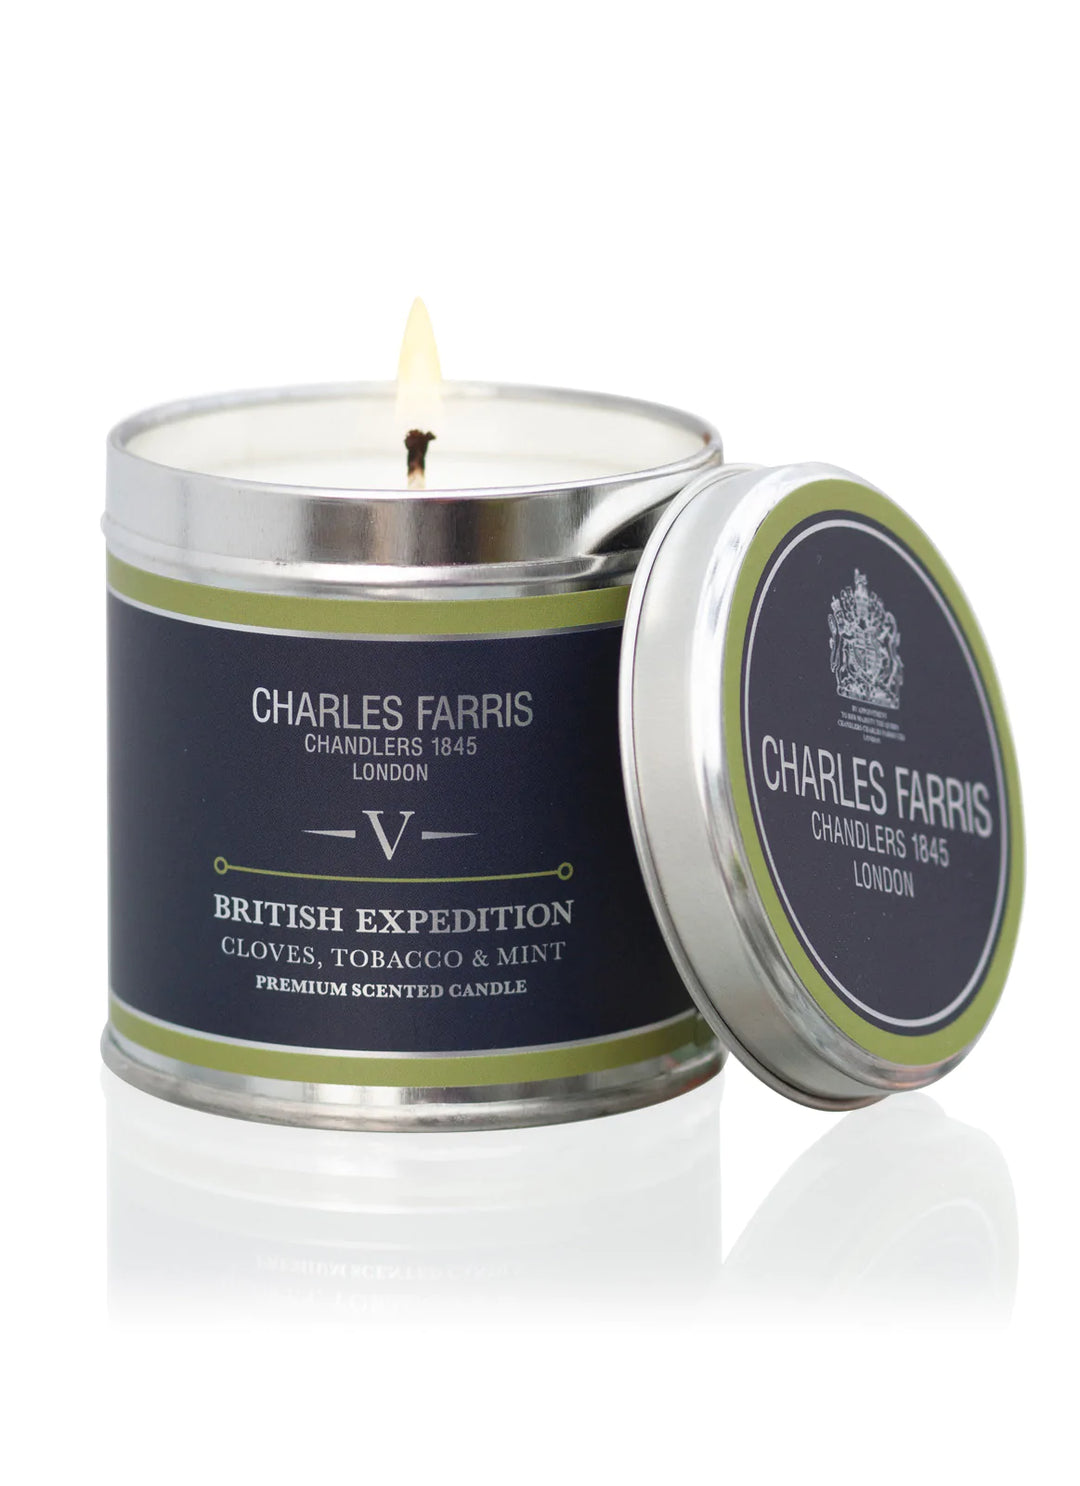 Scented Tin Candle - British Expedition / Cloves, Tobacco & Mint Tea